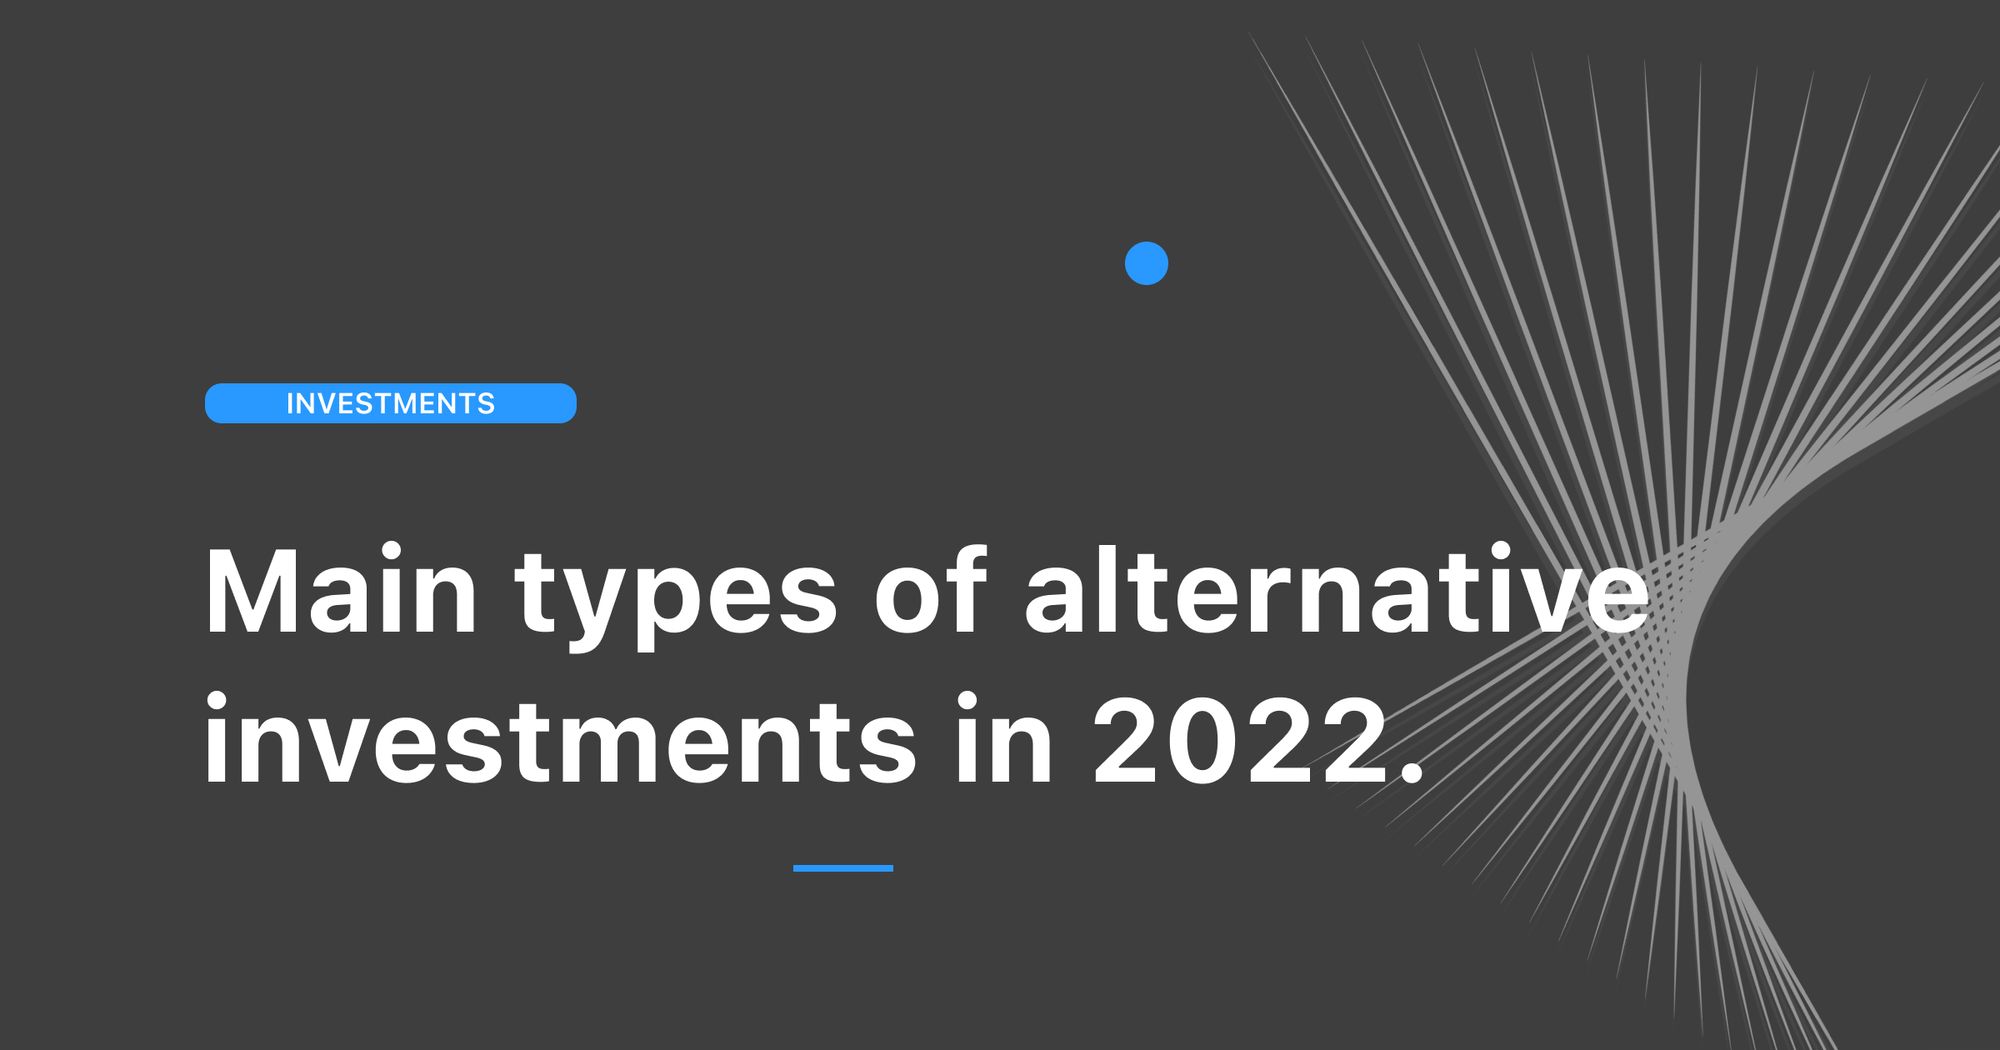 Main types of alternative investments in 2022.